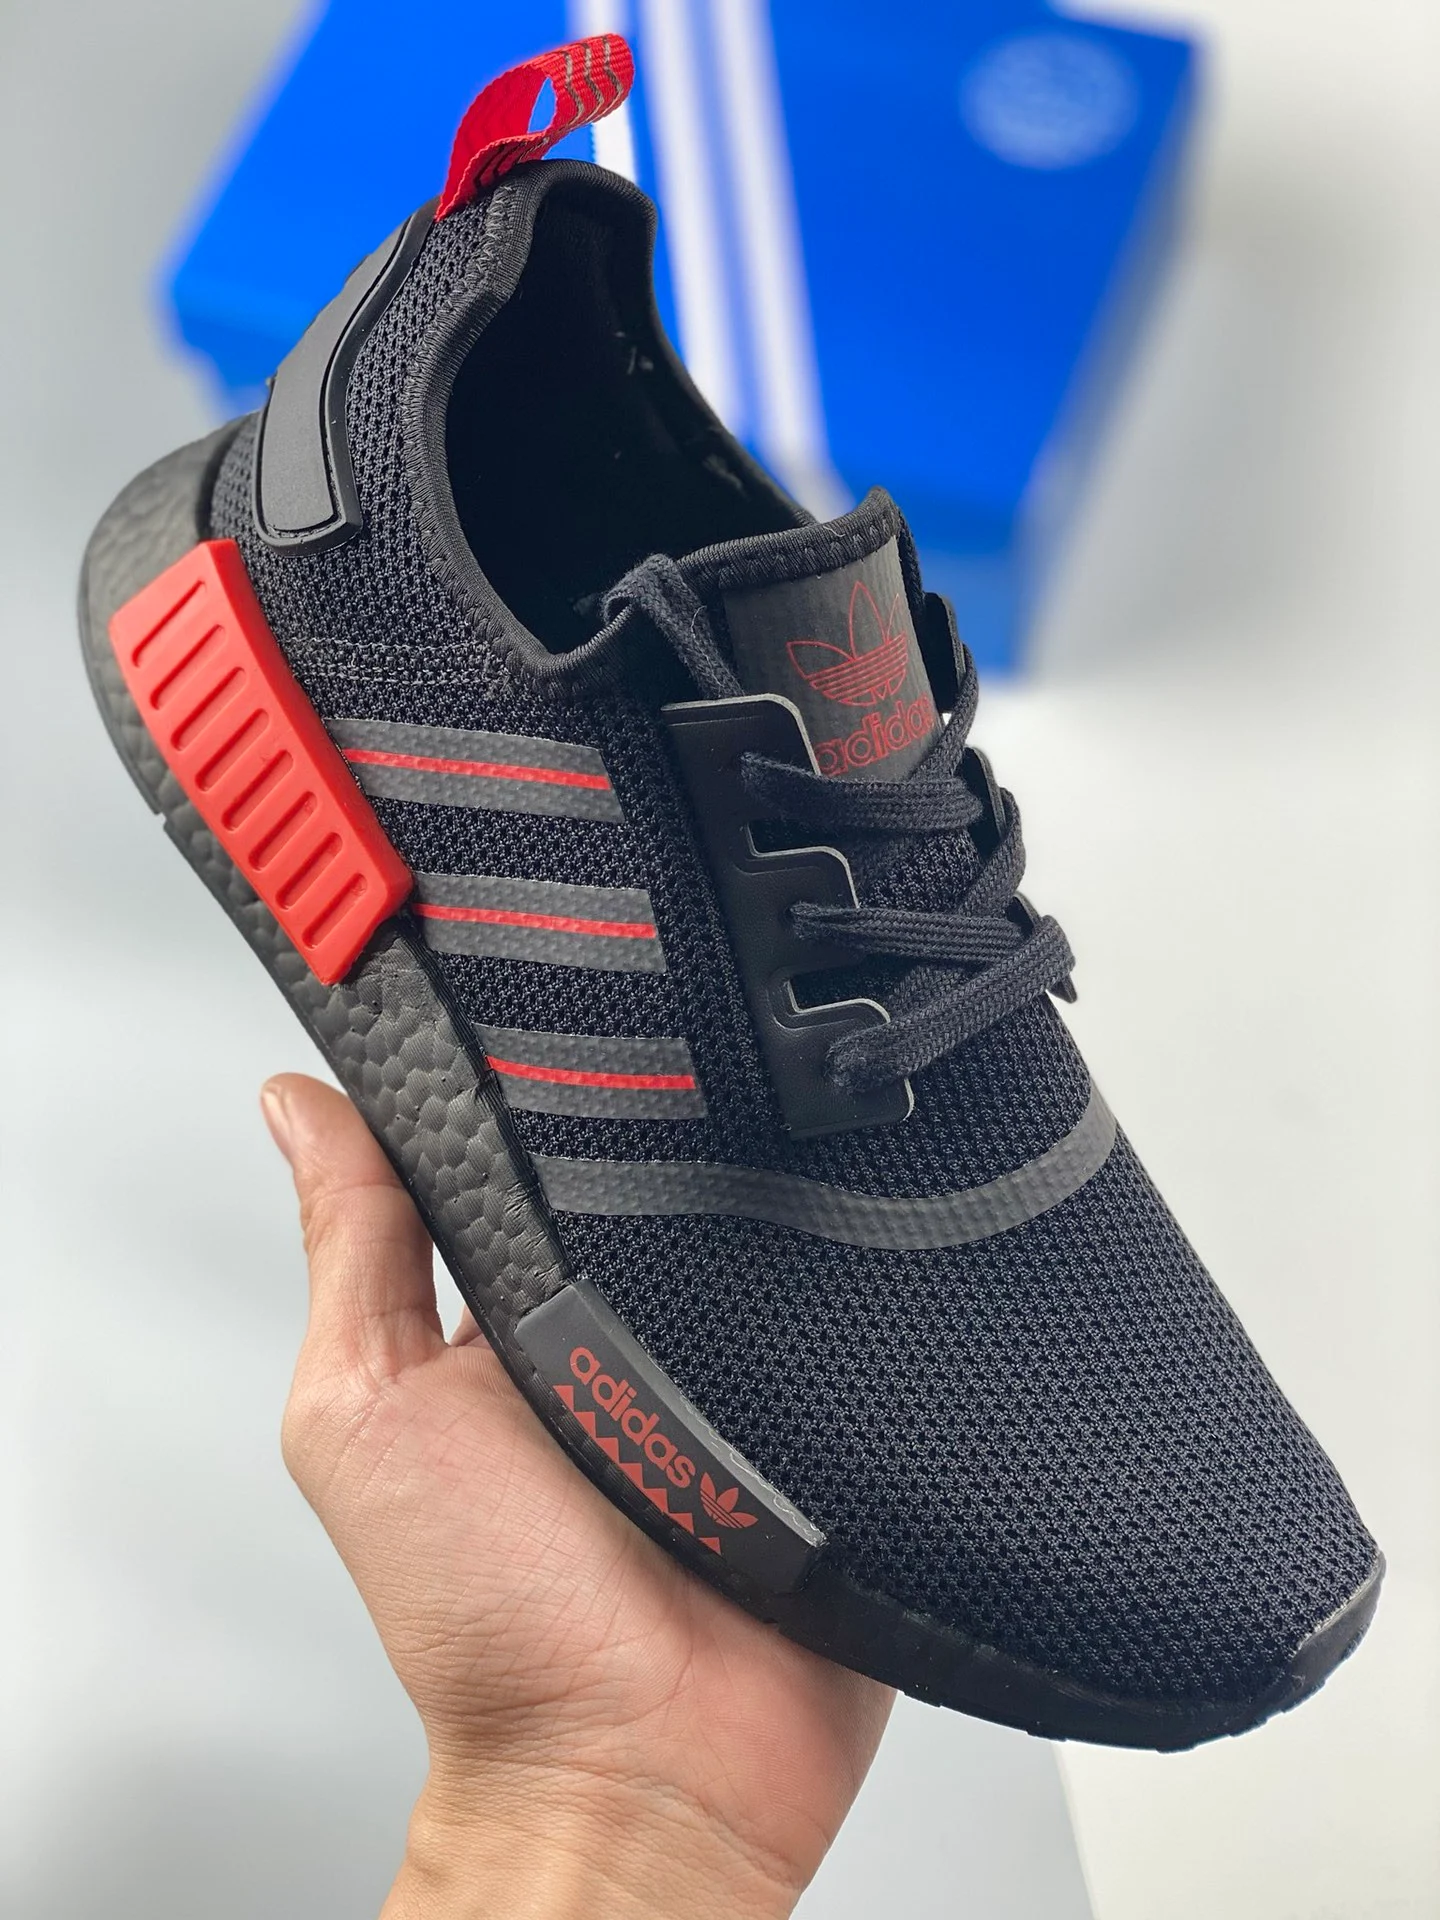 Adidas NMD R1 Core Black Red GV8422 For Sale